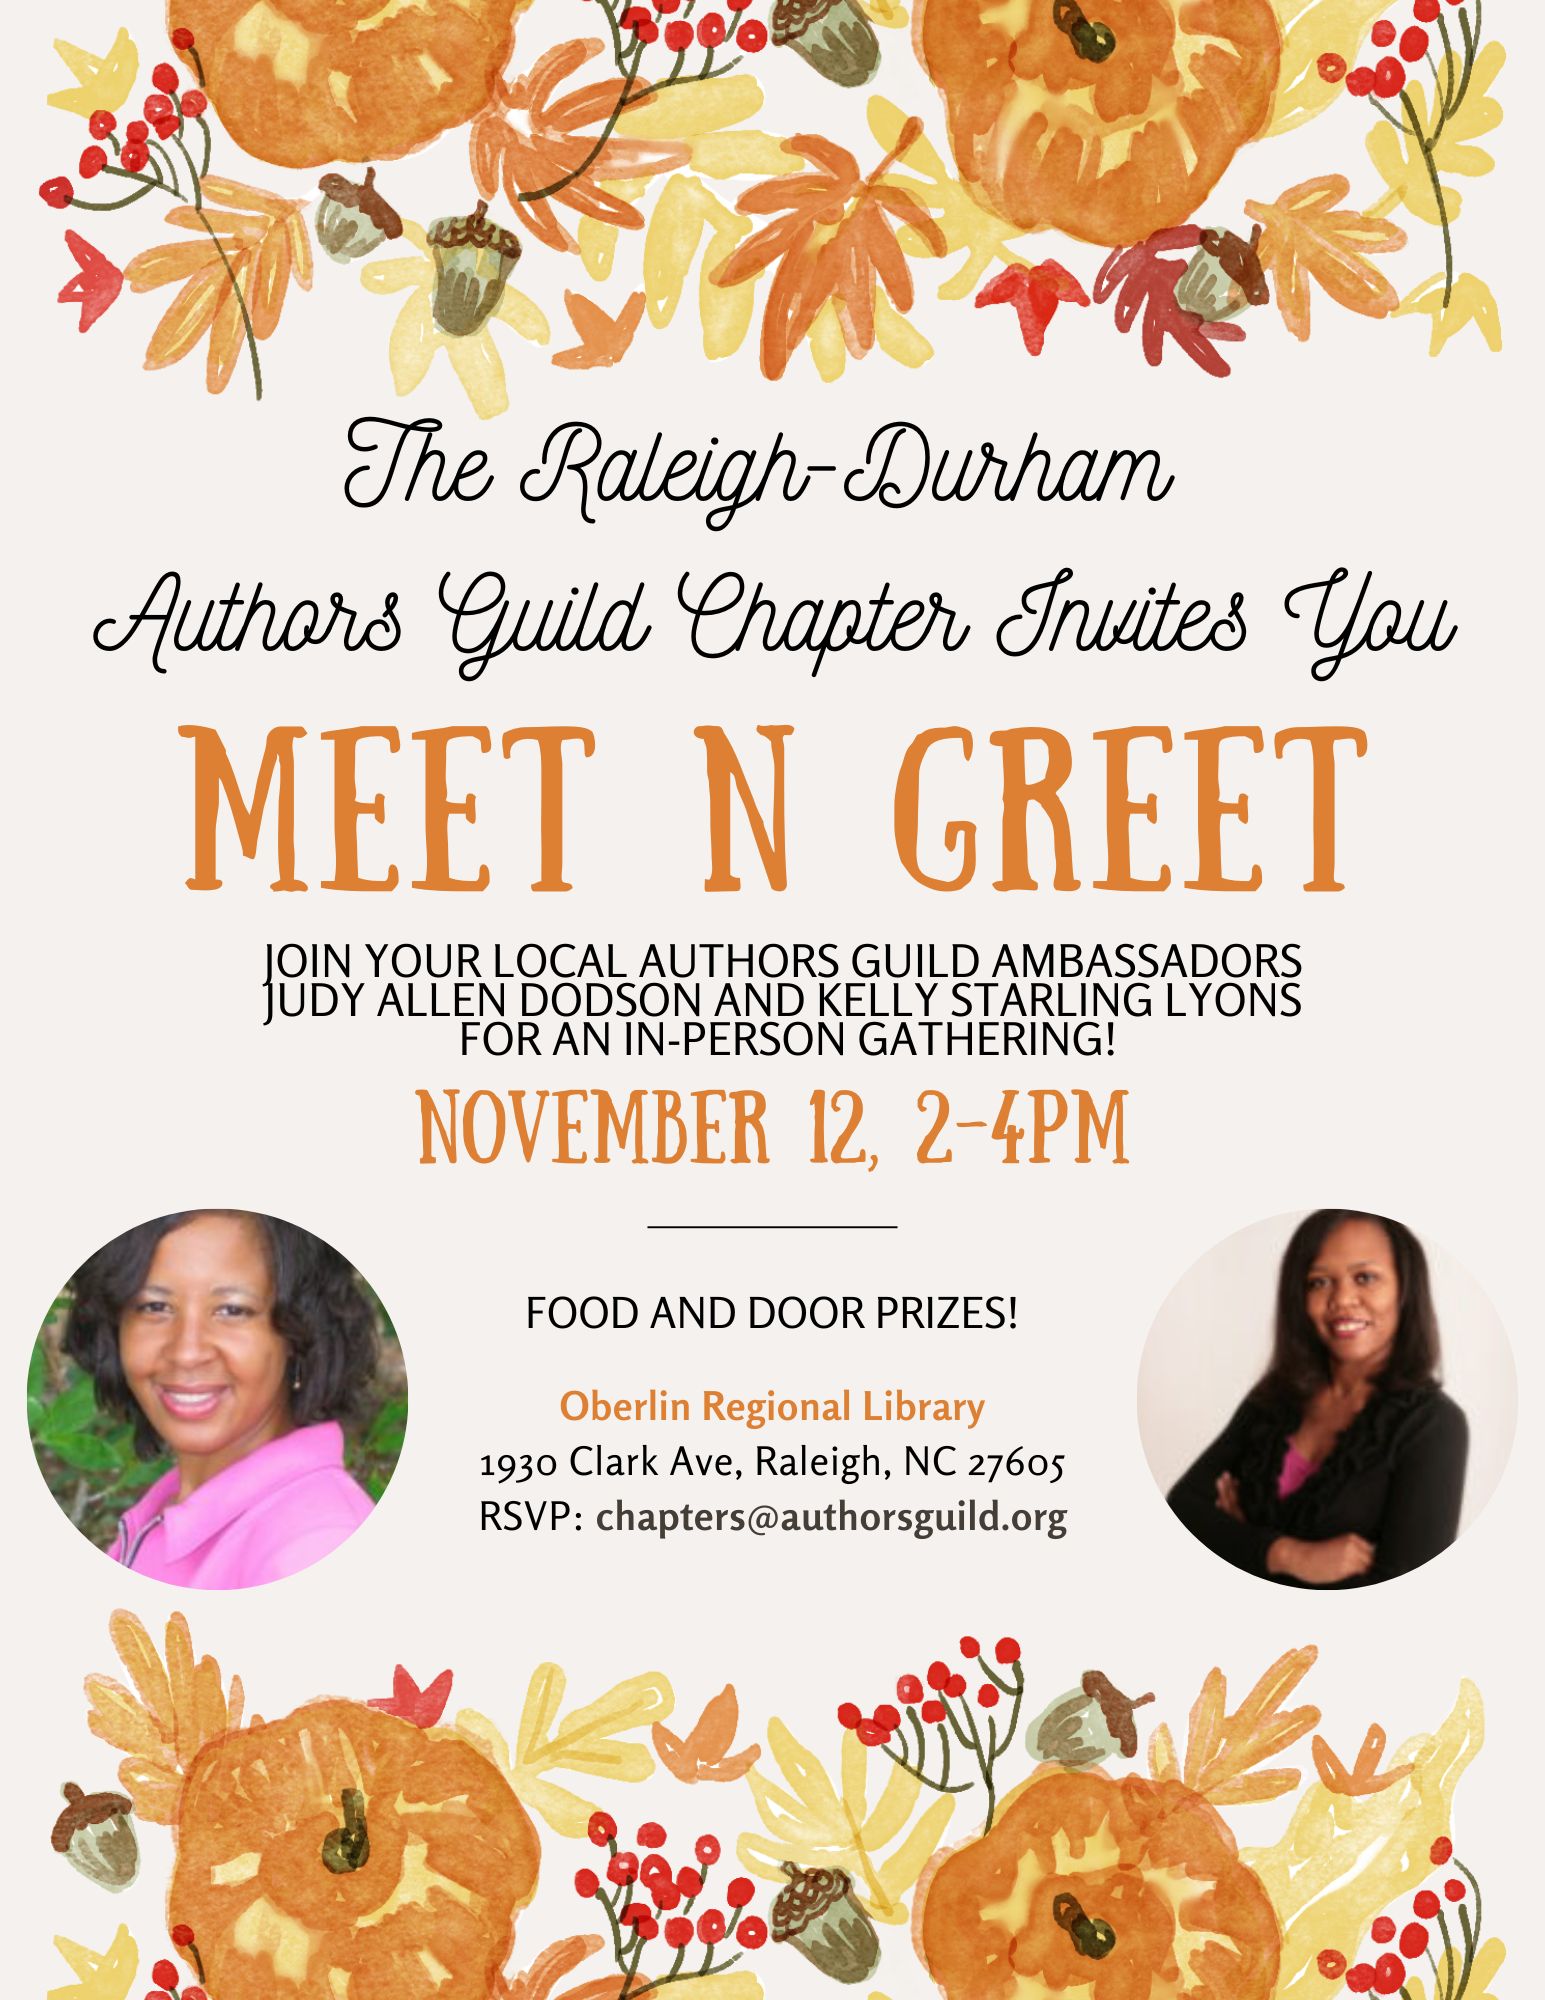 The Raleigh-Durham Authors Guild Chapter Invites You to a Meet n Greet on November 12, 2023